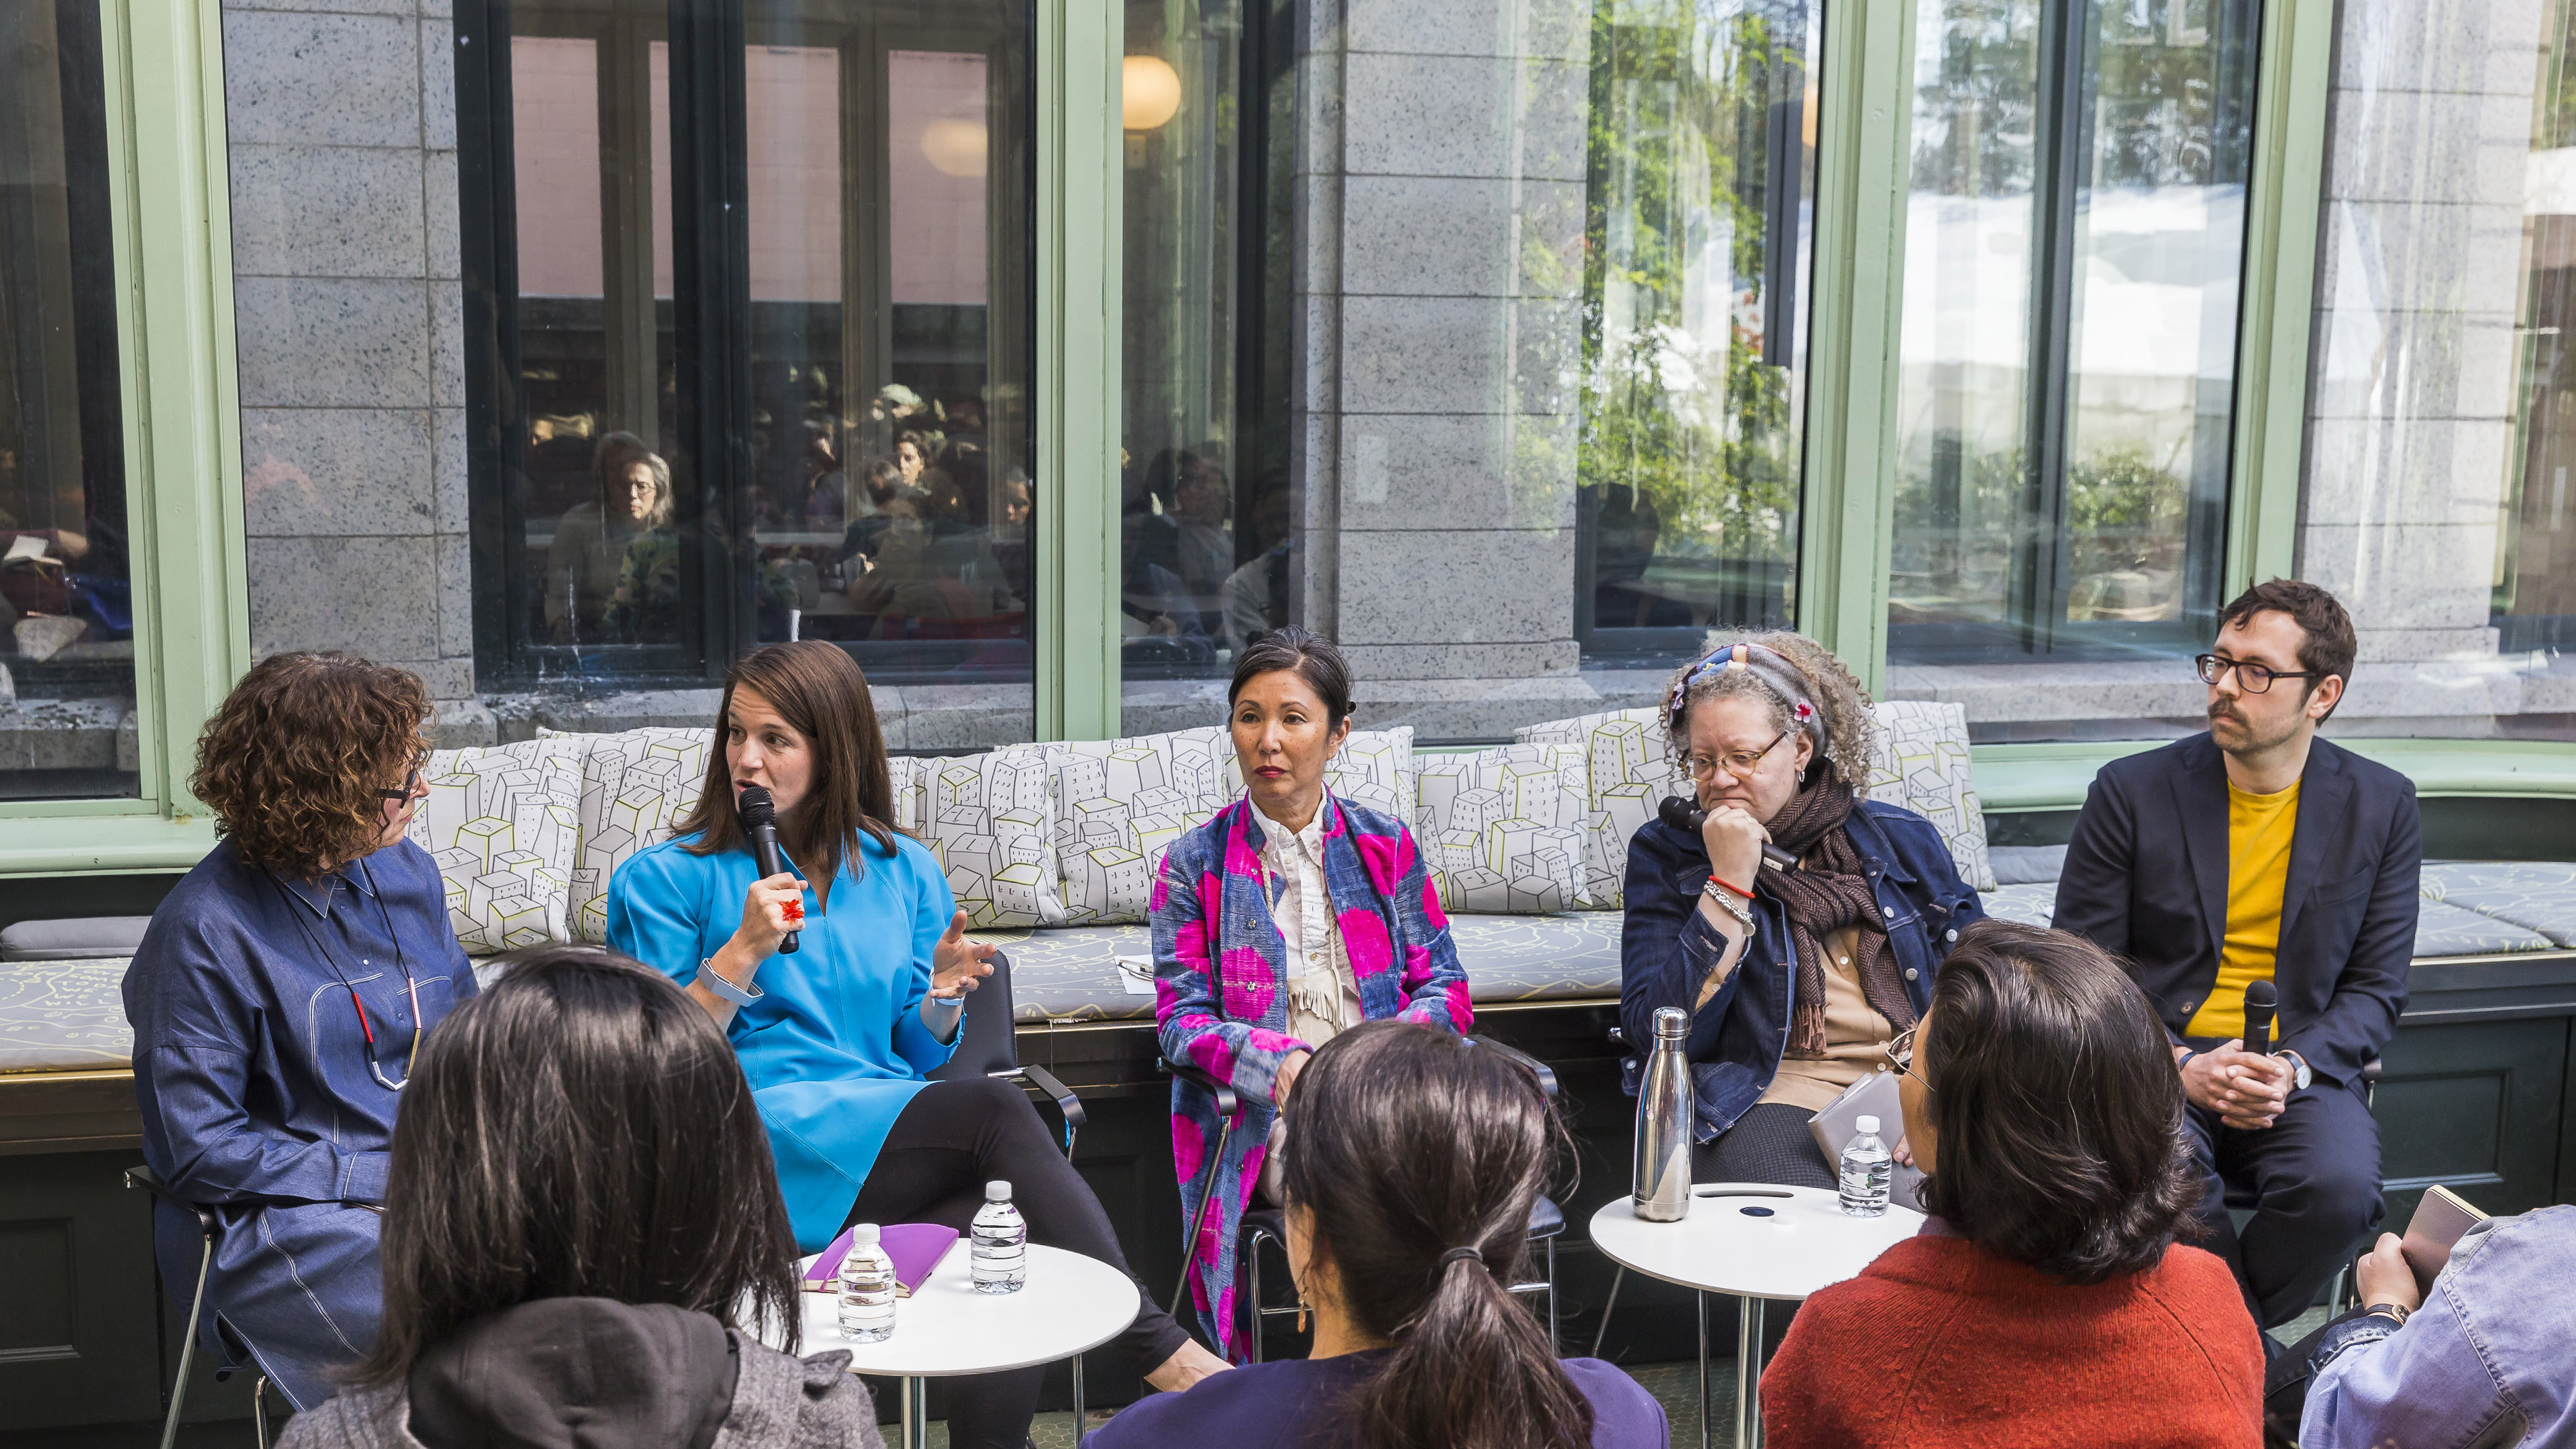 Image of a panel discussion in the Cooper Hewitt conservatory. From left to right: Cynthia Smith, curator in dark blue, Liz Gerber in bright blue, Christina Kim in pink and blue flower suit, Gail Anderson, in dark blue, and Gabriel Stromberg